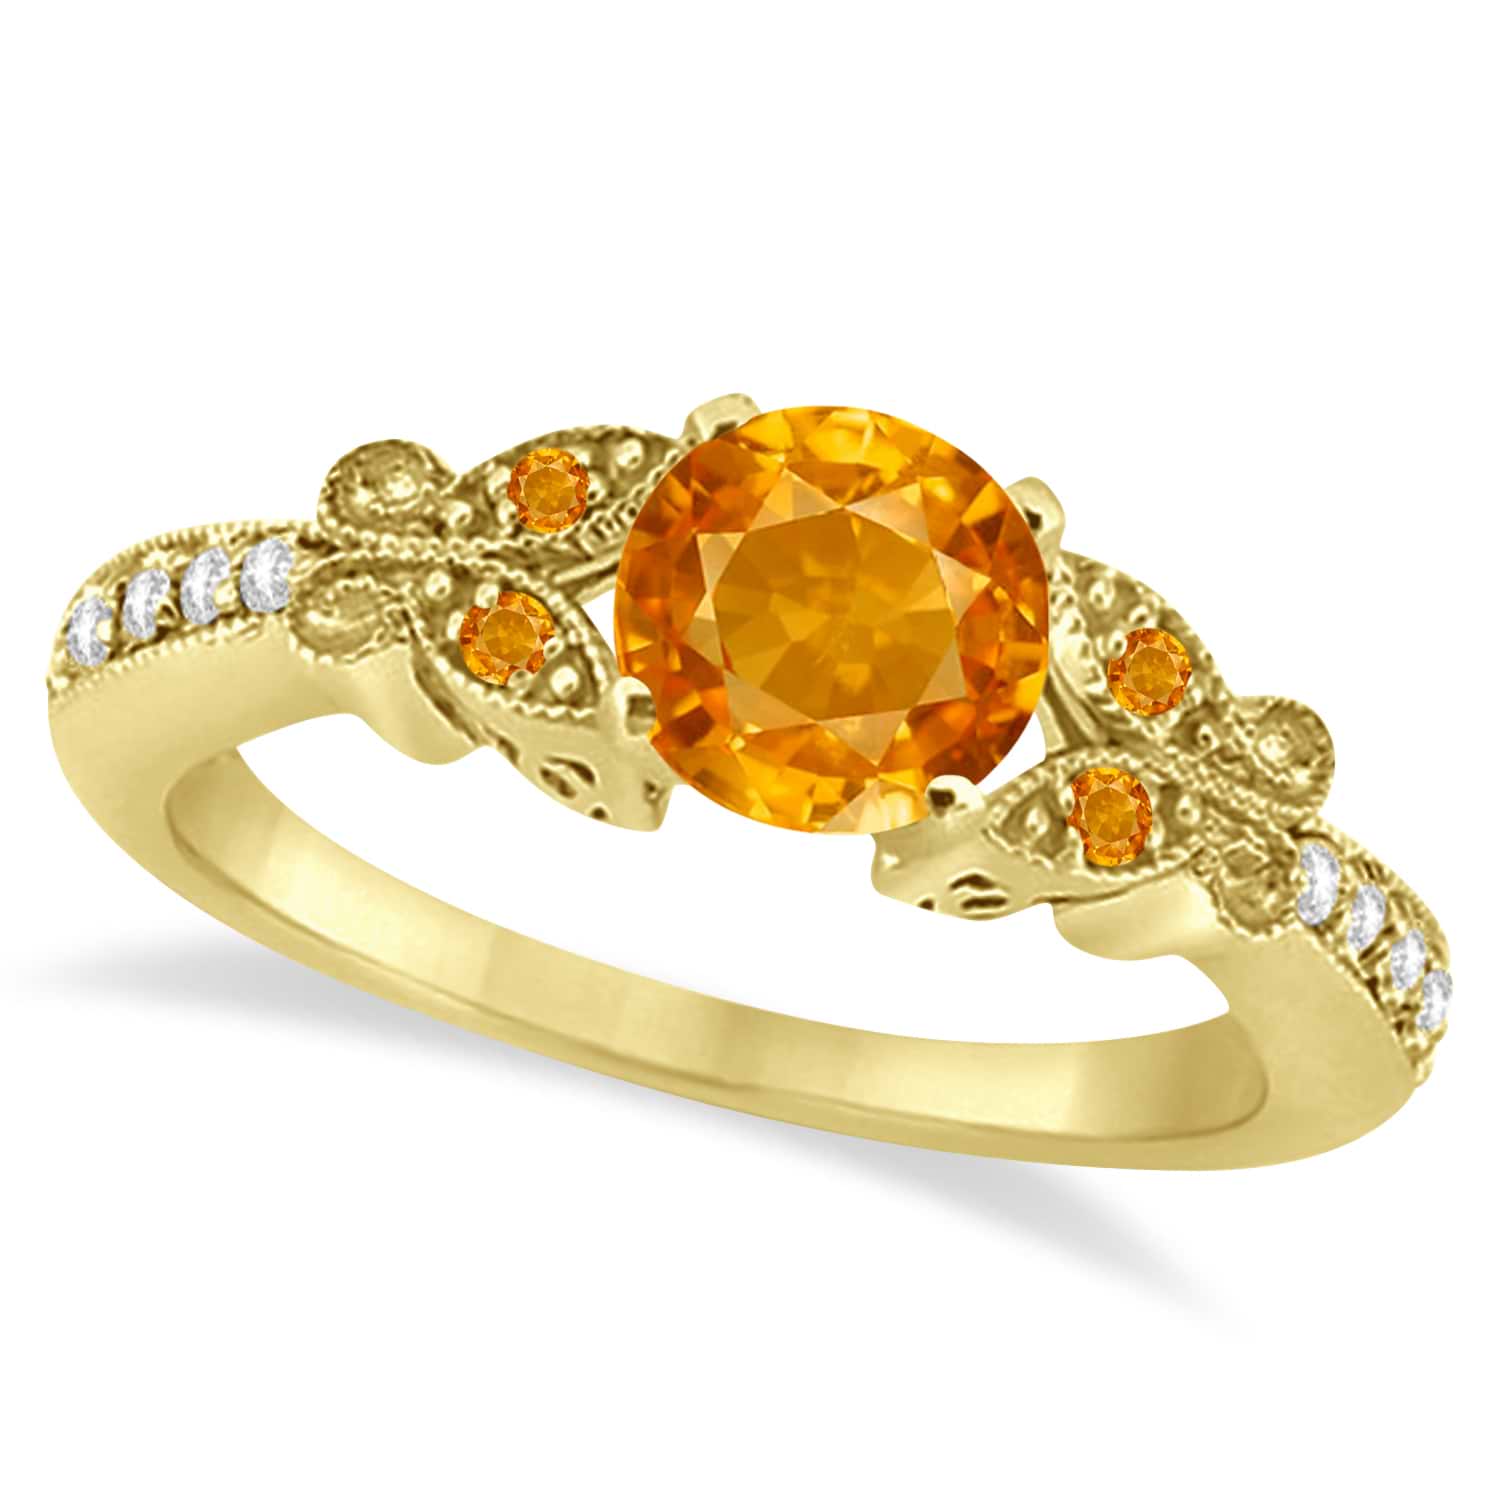 Butterfly Genuine Citrine & Diamond Engagement Ring 18K Yellow Gold 0.88ct